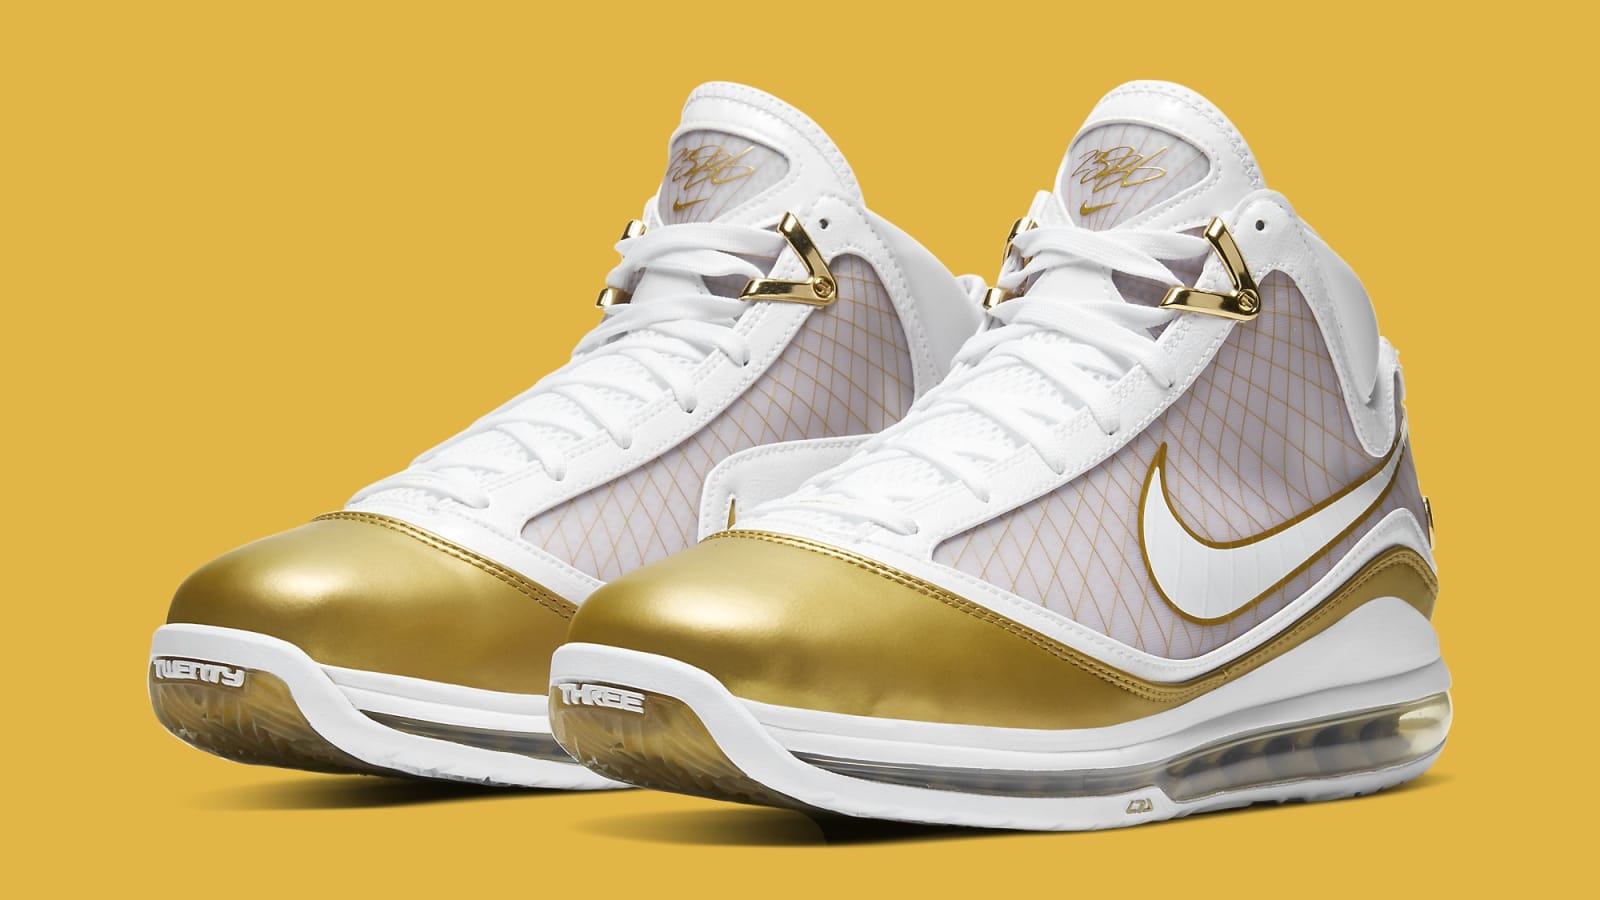 Nike LeBron 7 "China Moon" Coming Soon: Official Images